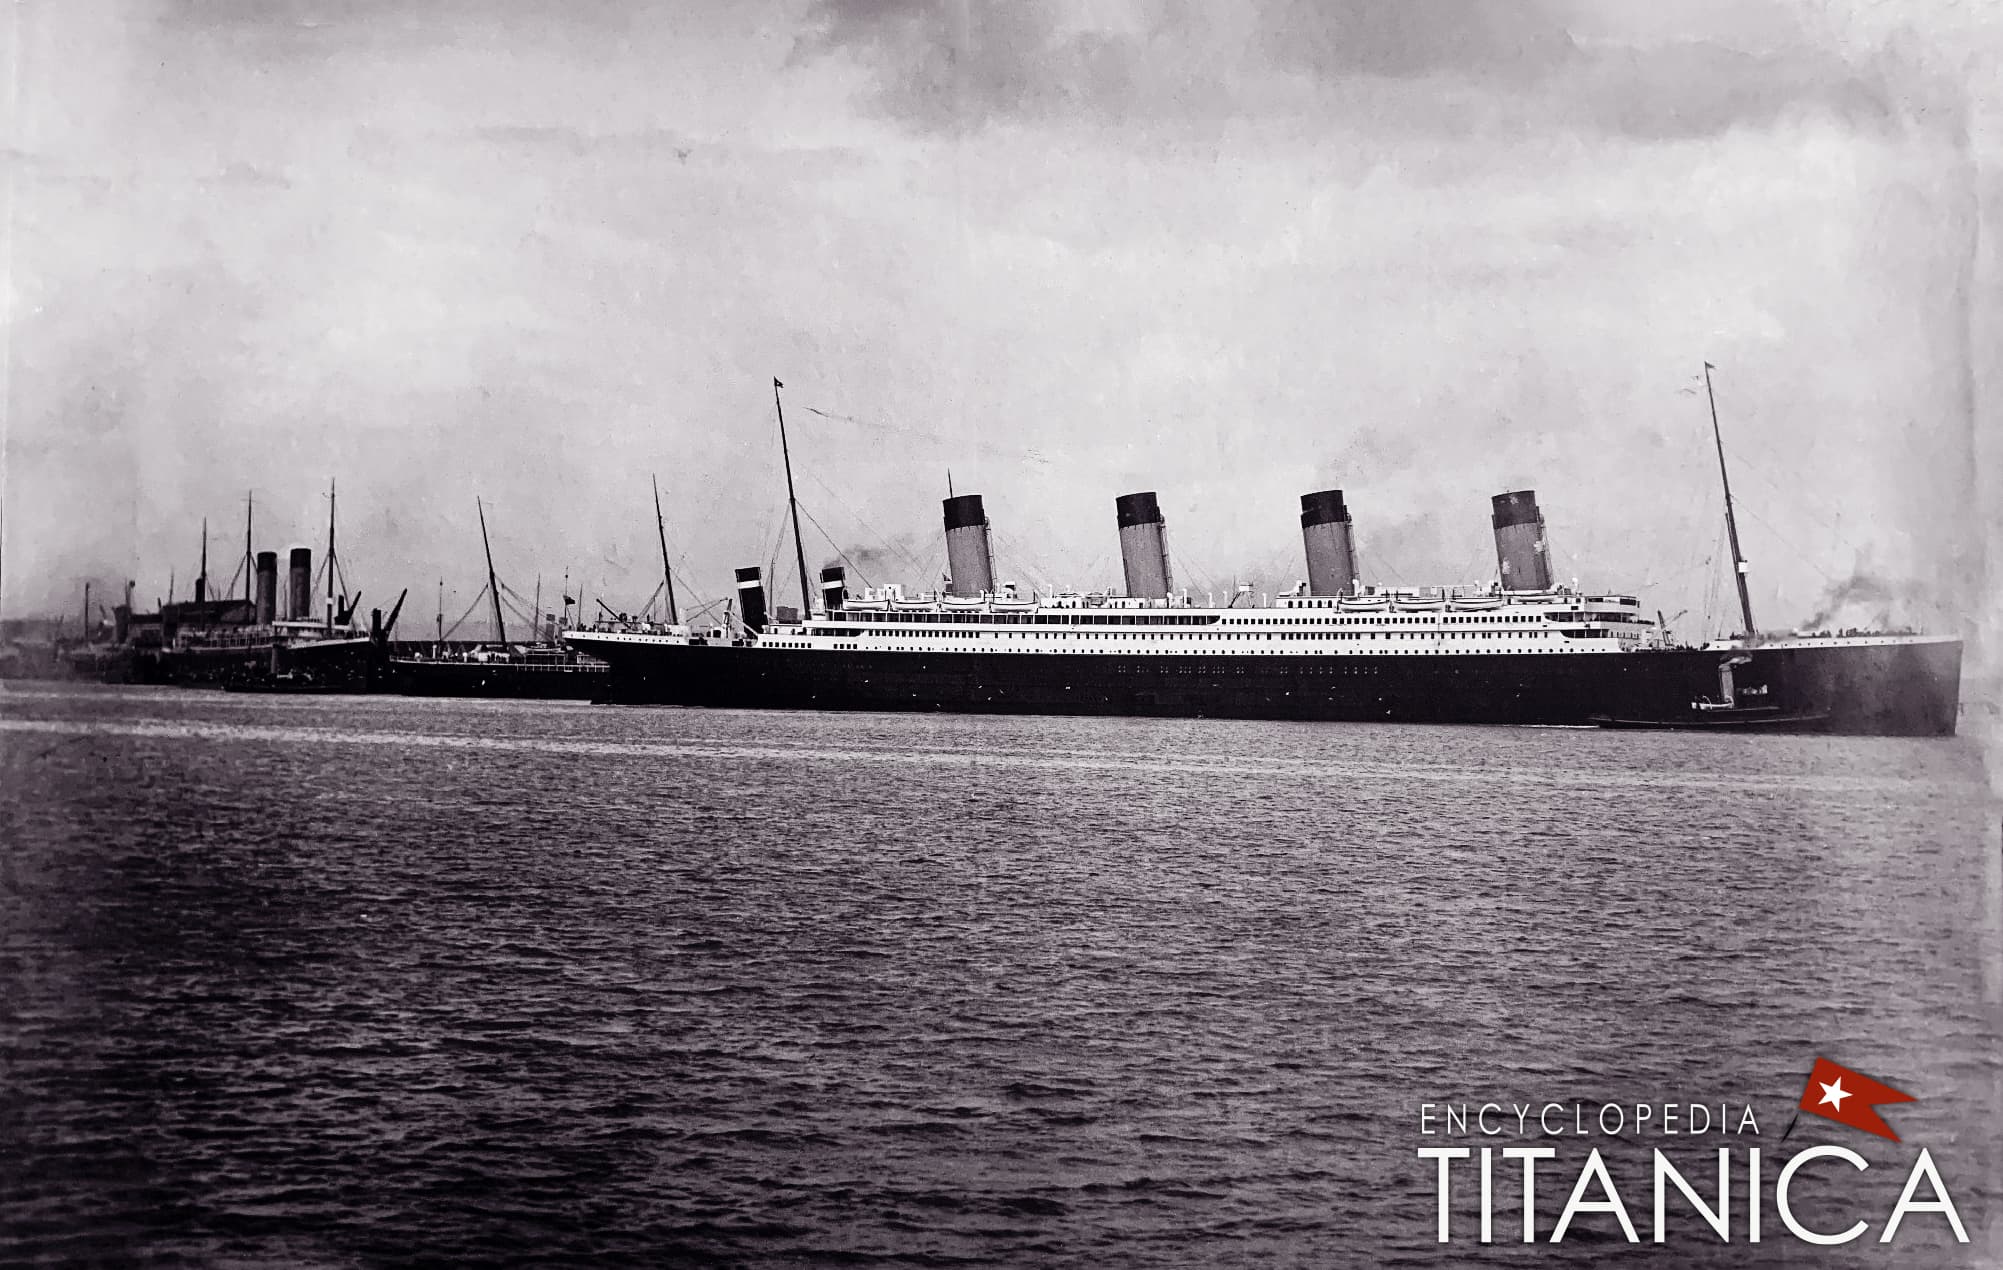 RMS Titanic and the SS New York